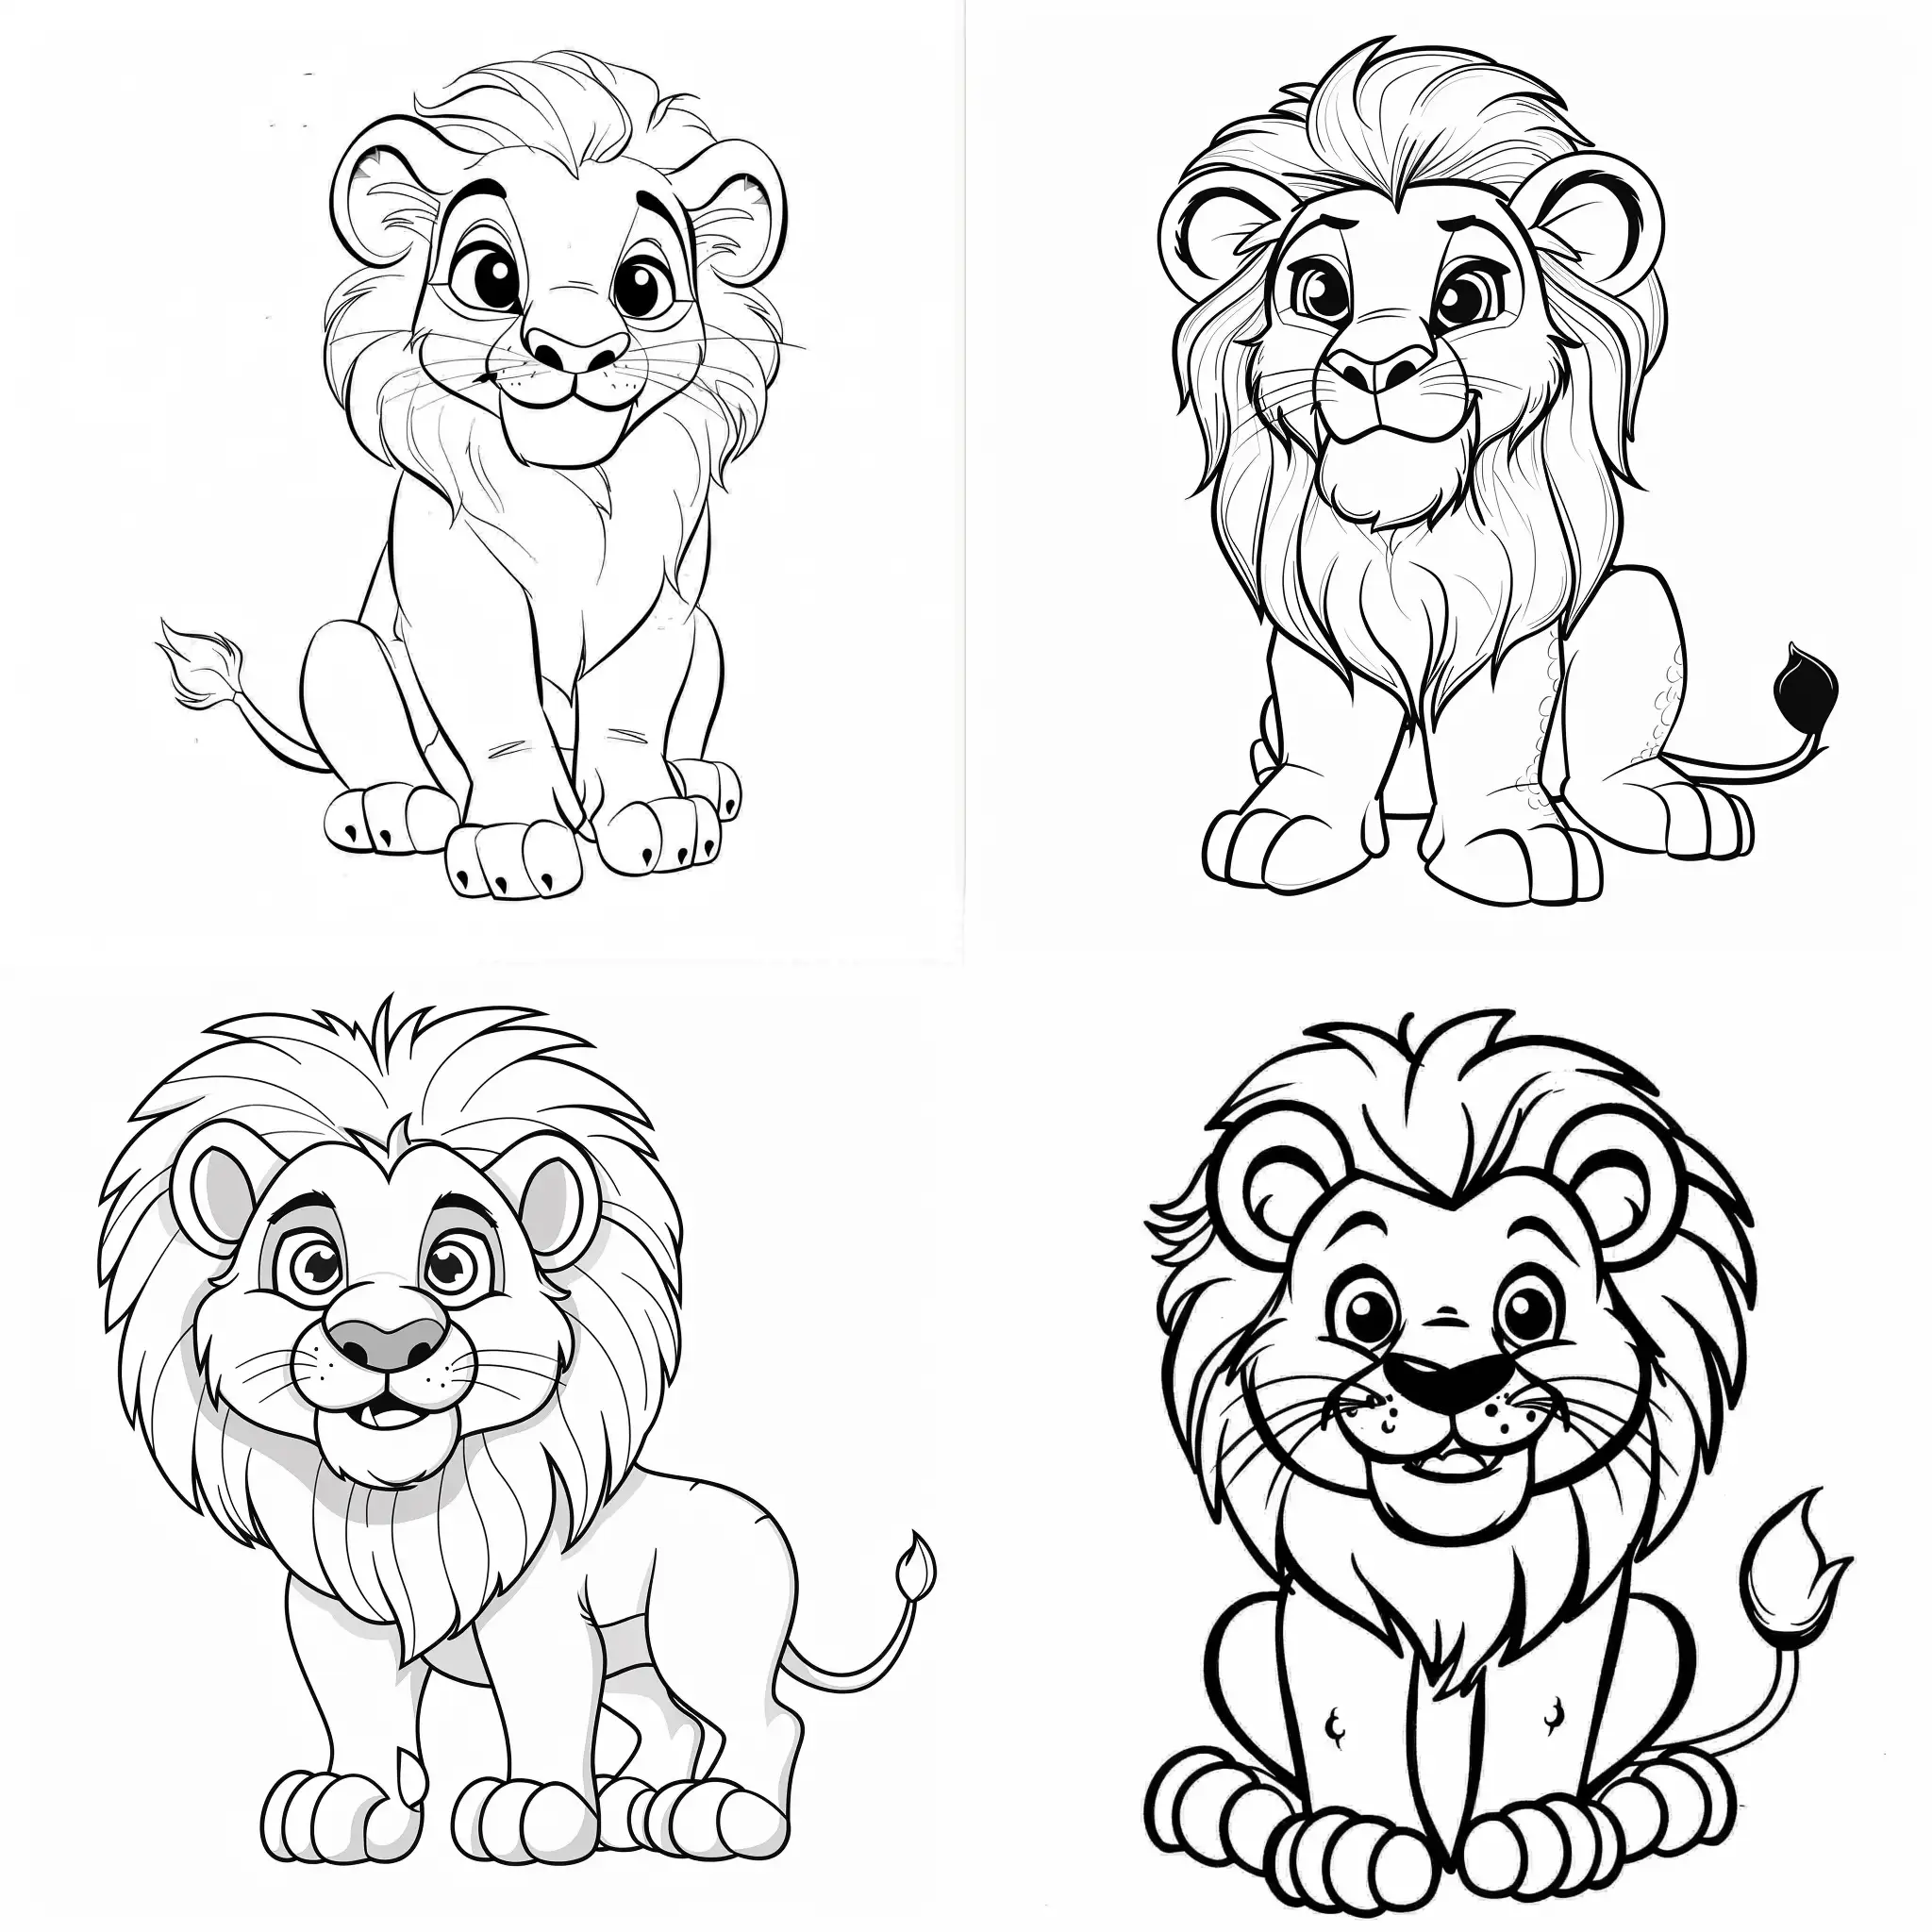 Cute-and-Simple-Lion-Coloring-Page-for-Kids